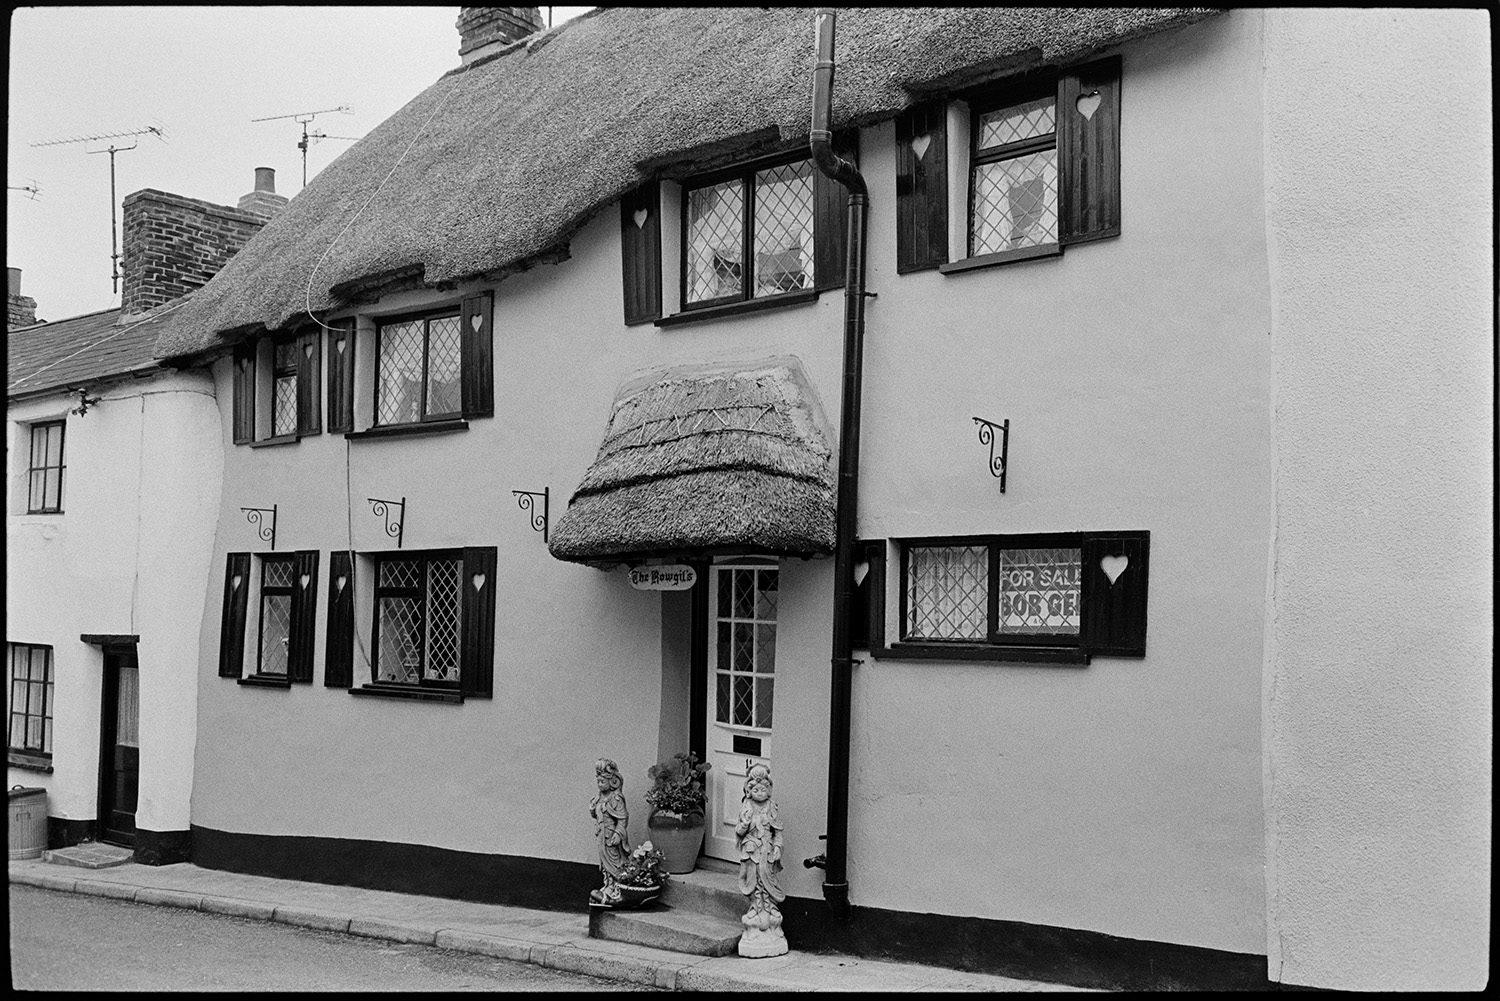 Street with hideously ruined thatched cottage, unsuitable shutters and windows. Aaaaagh!!!
[A thatched cottage with shutters and ornaments on the doorstep for sale in Hatherleigh. Heart shapes are cut into the shutters and a sign below the porch reads 'The Rowgil's'.]